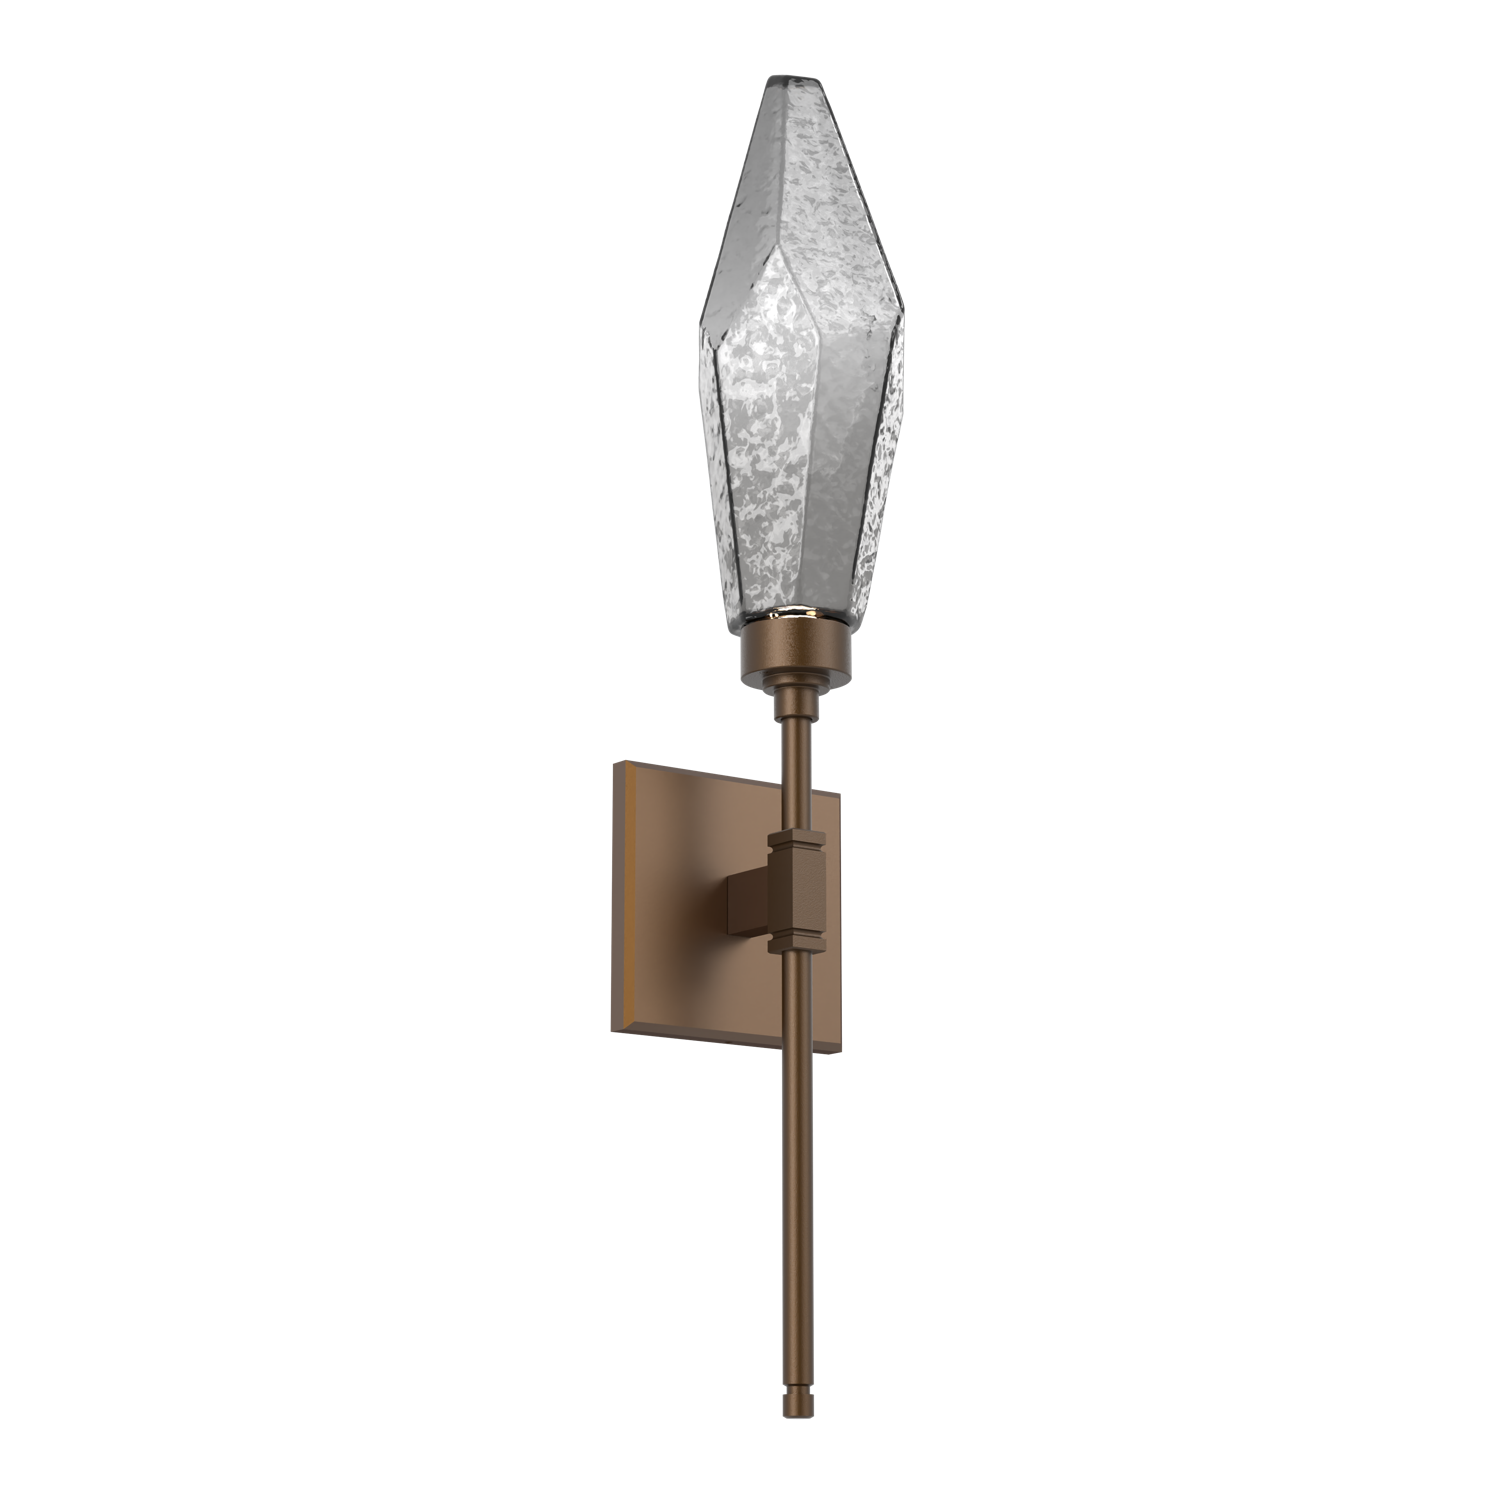 IDB0050-04-FB-CS-Hammerton-Studio-Rock-Crystal-ada-certified-belvedere-wall-sconce-with-flat-bronze-finish-and-chilled-smoke-glass-shades-and-LED-lamping